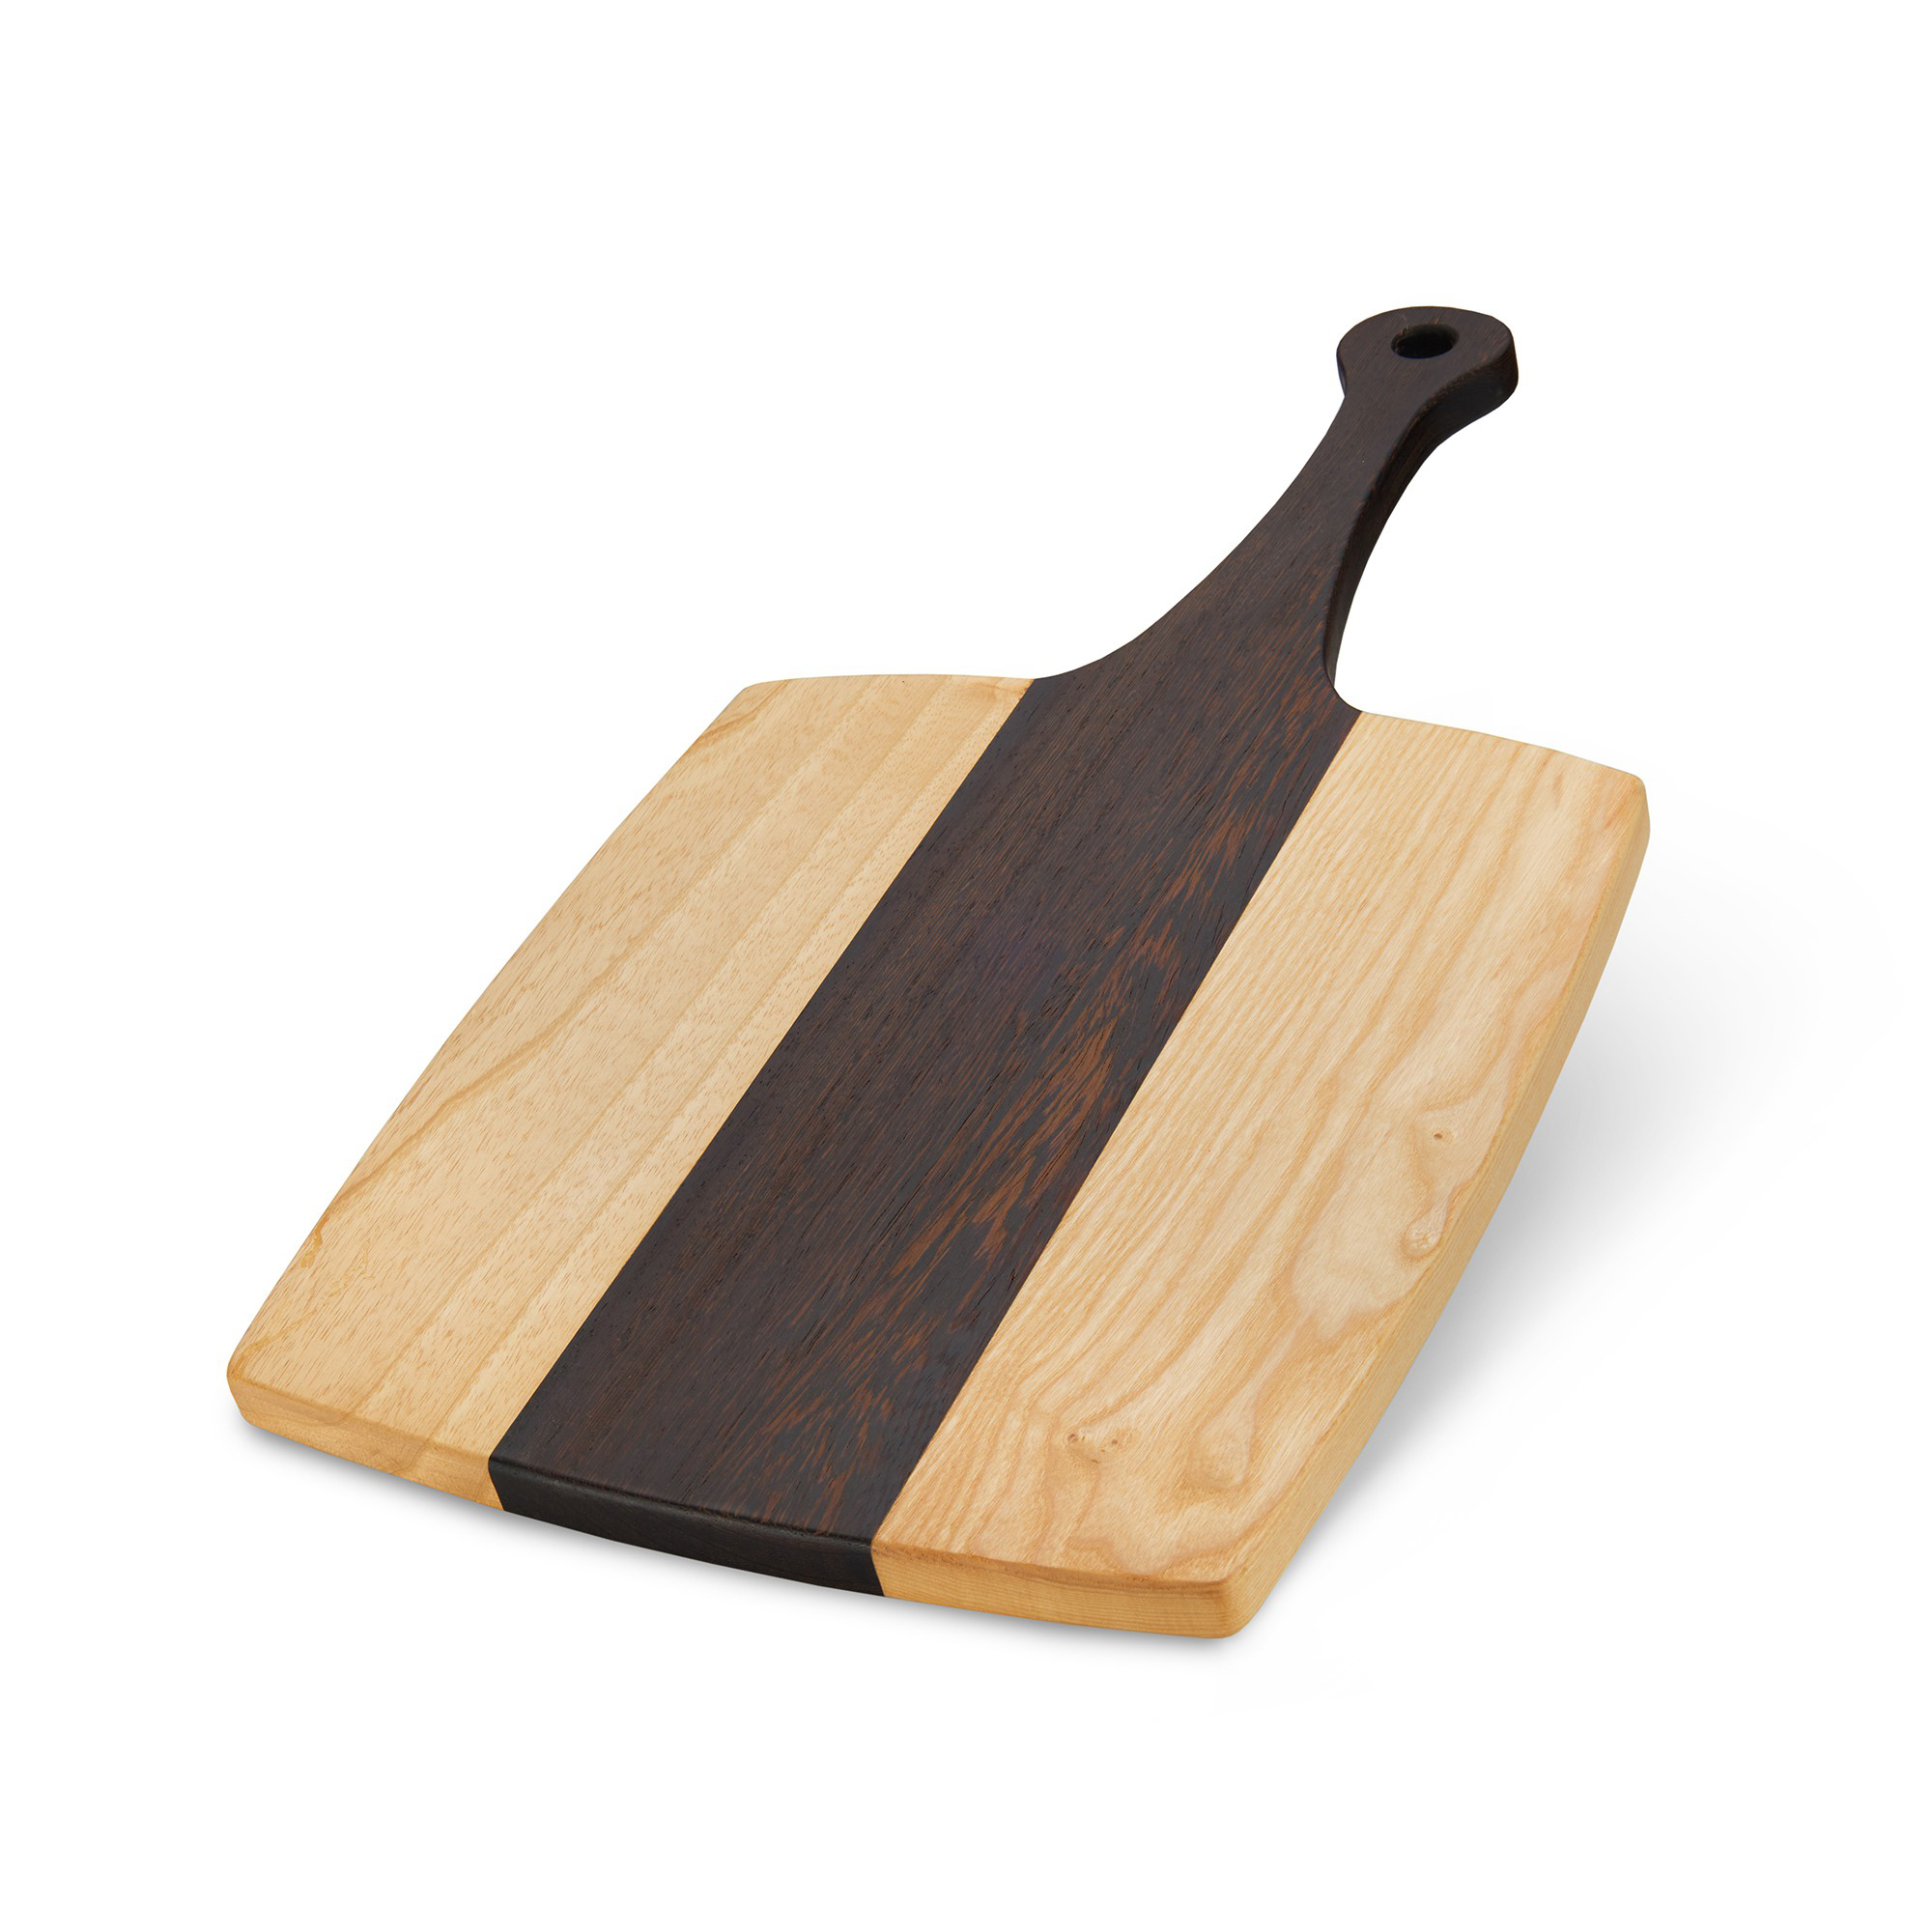 Shangrun Cutting Board For Kitchen With Handle